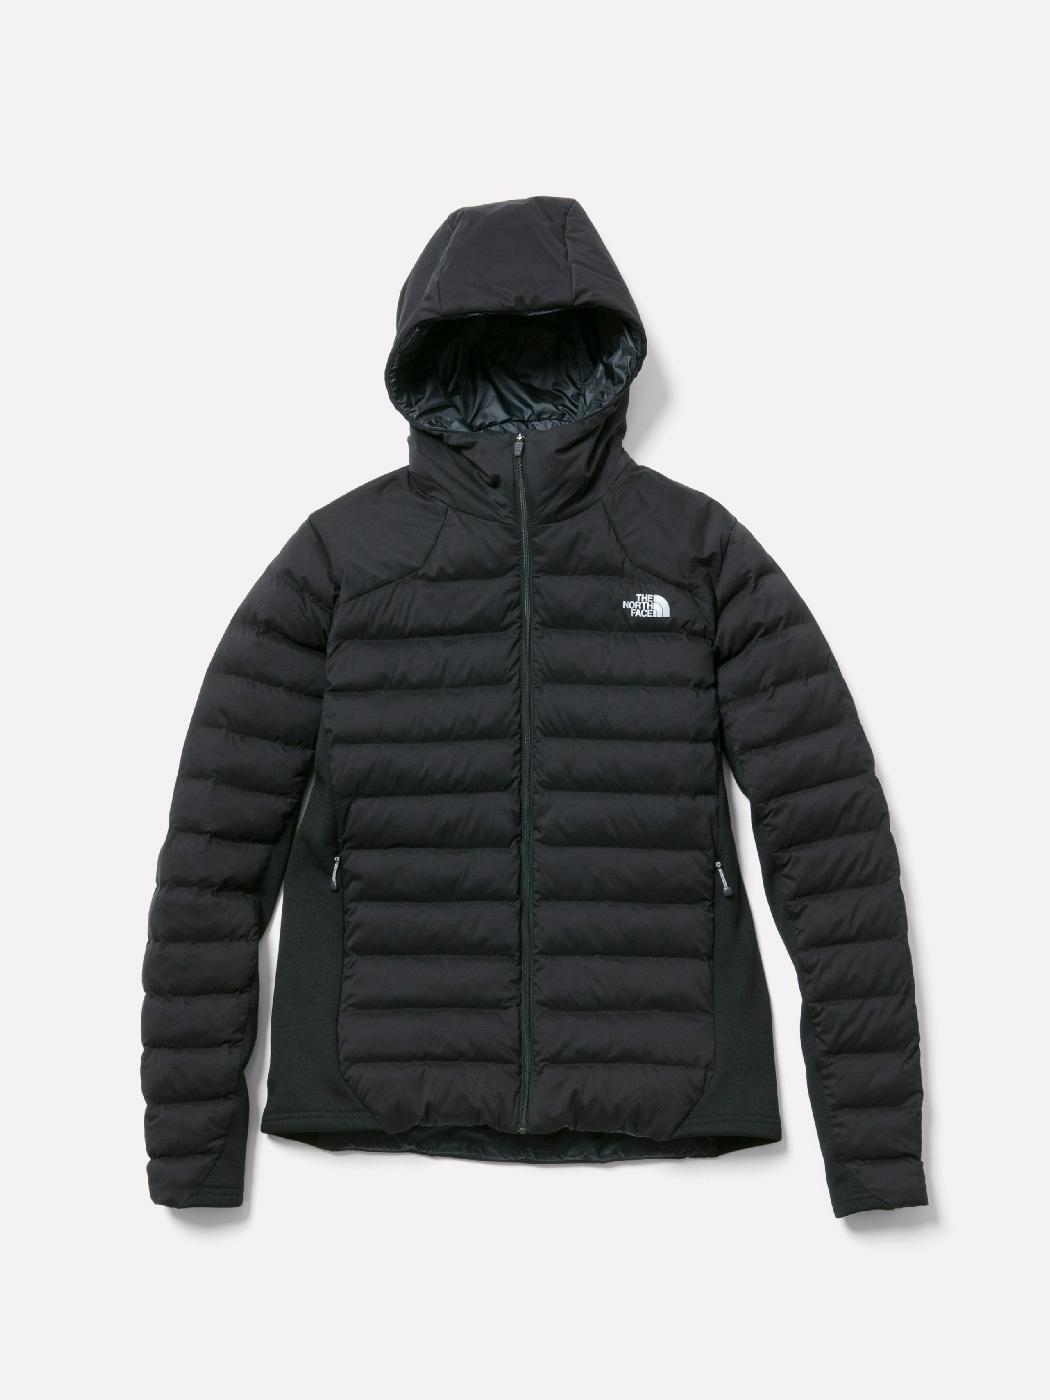 Add Warmth THE NORTH FACE WOMEN'S 2018 FALL & WINTER | THE NORTH FACE